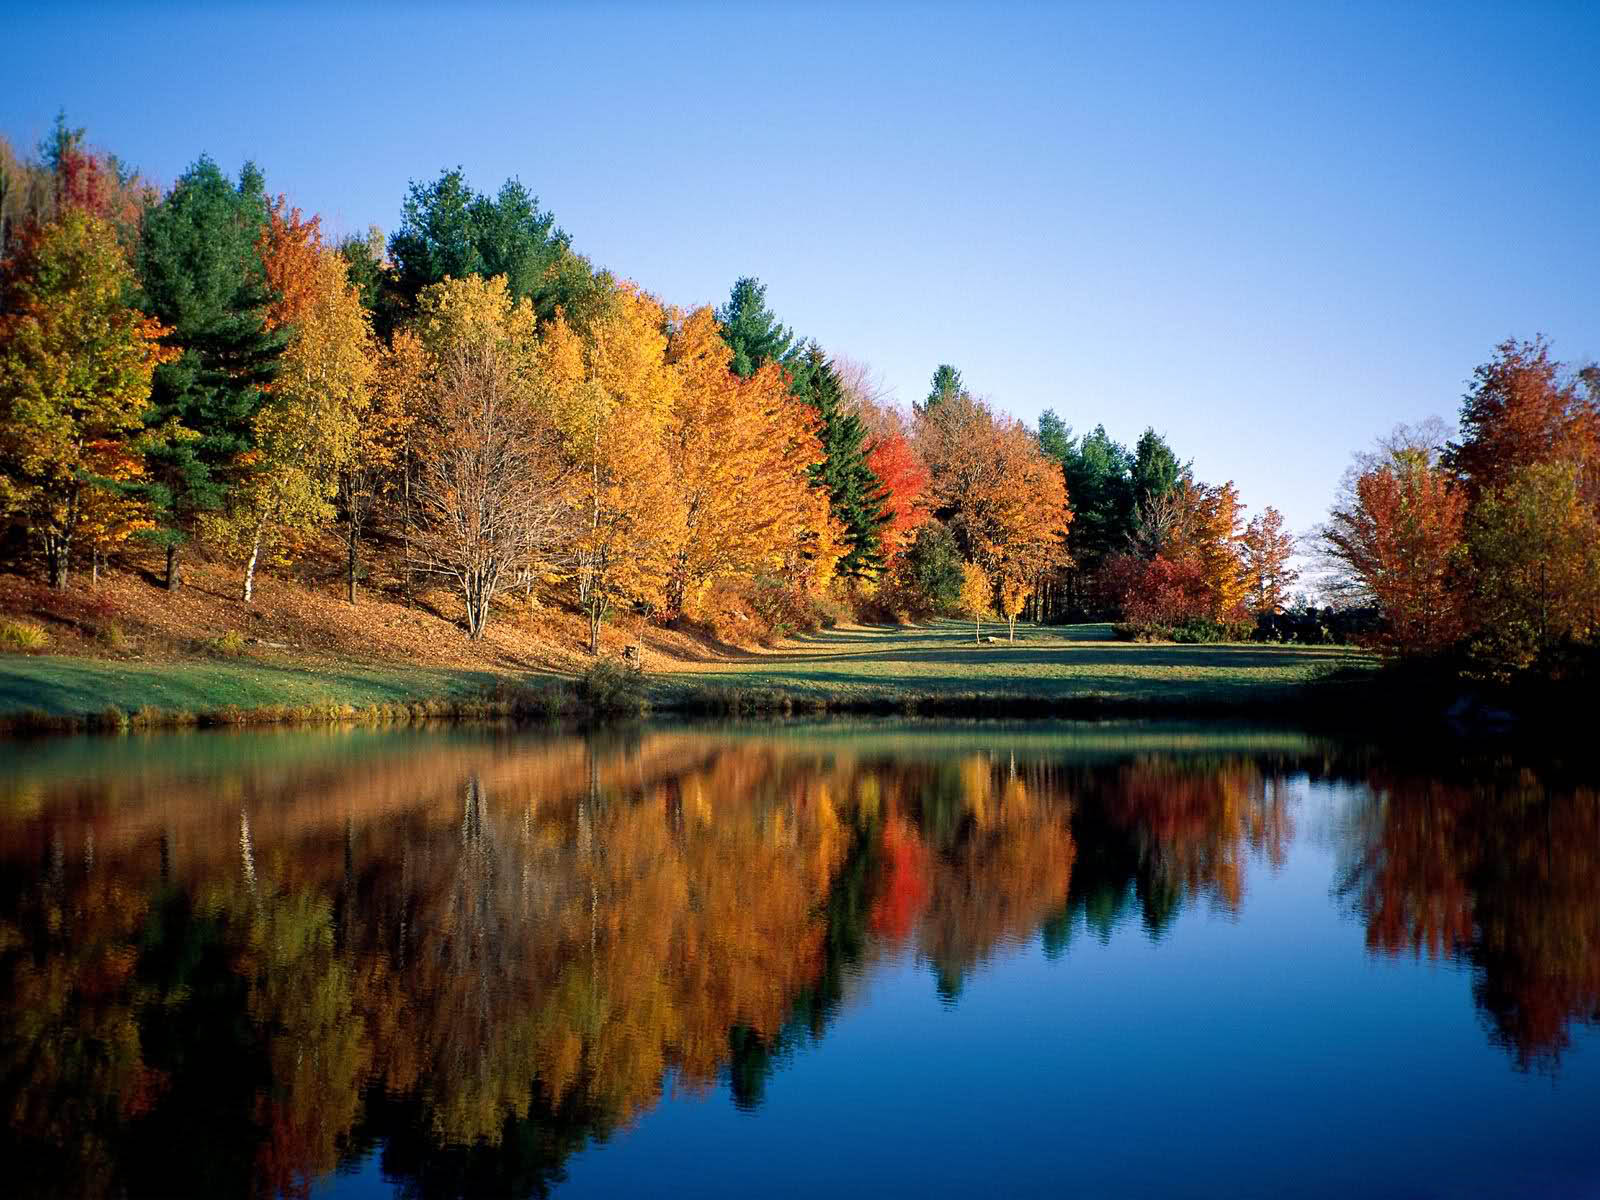 Autumn Scenery Wallpaper Background Photos Image And Pictures For